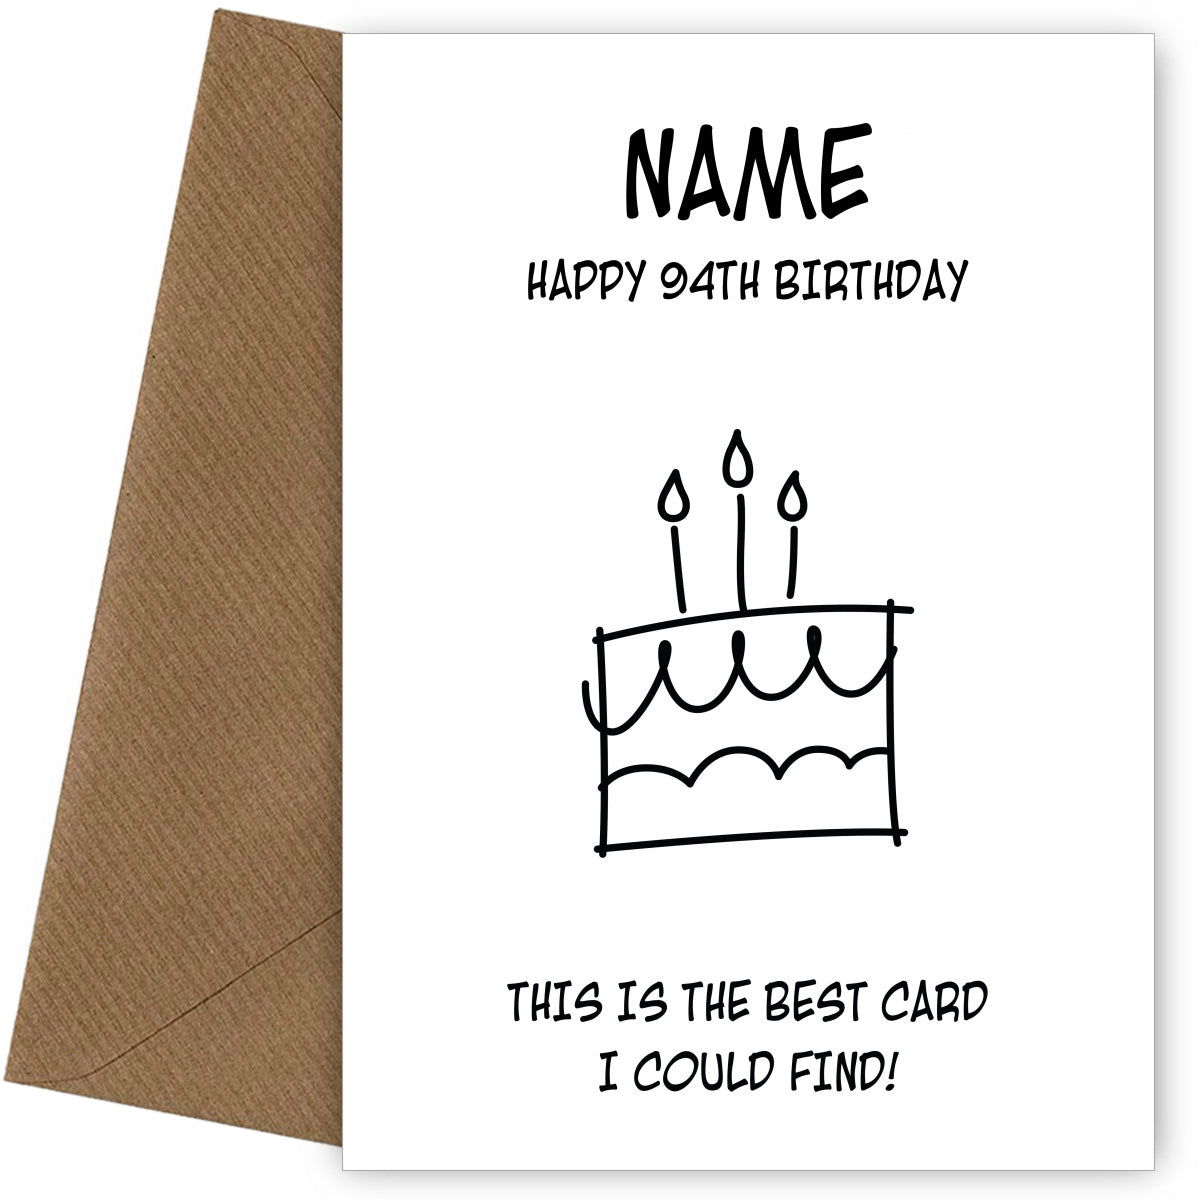 Happy 94th Birthday Card - Best Card I Could Find!